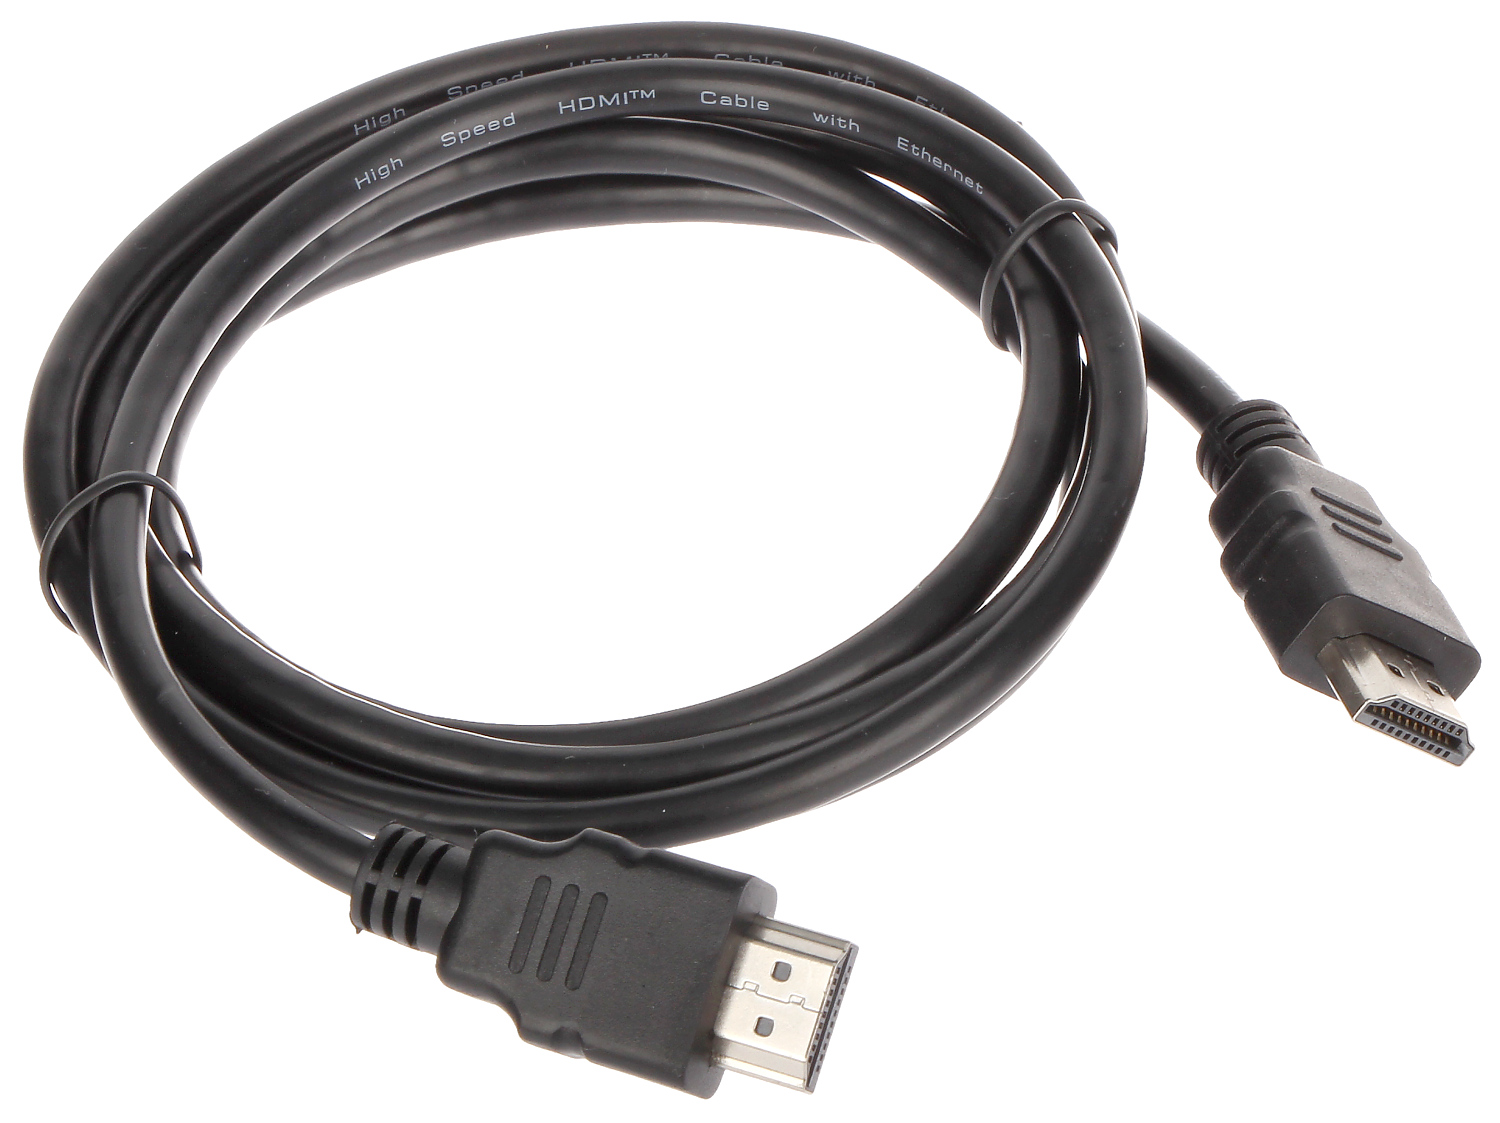 CABLE HDMI PLAT 5M